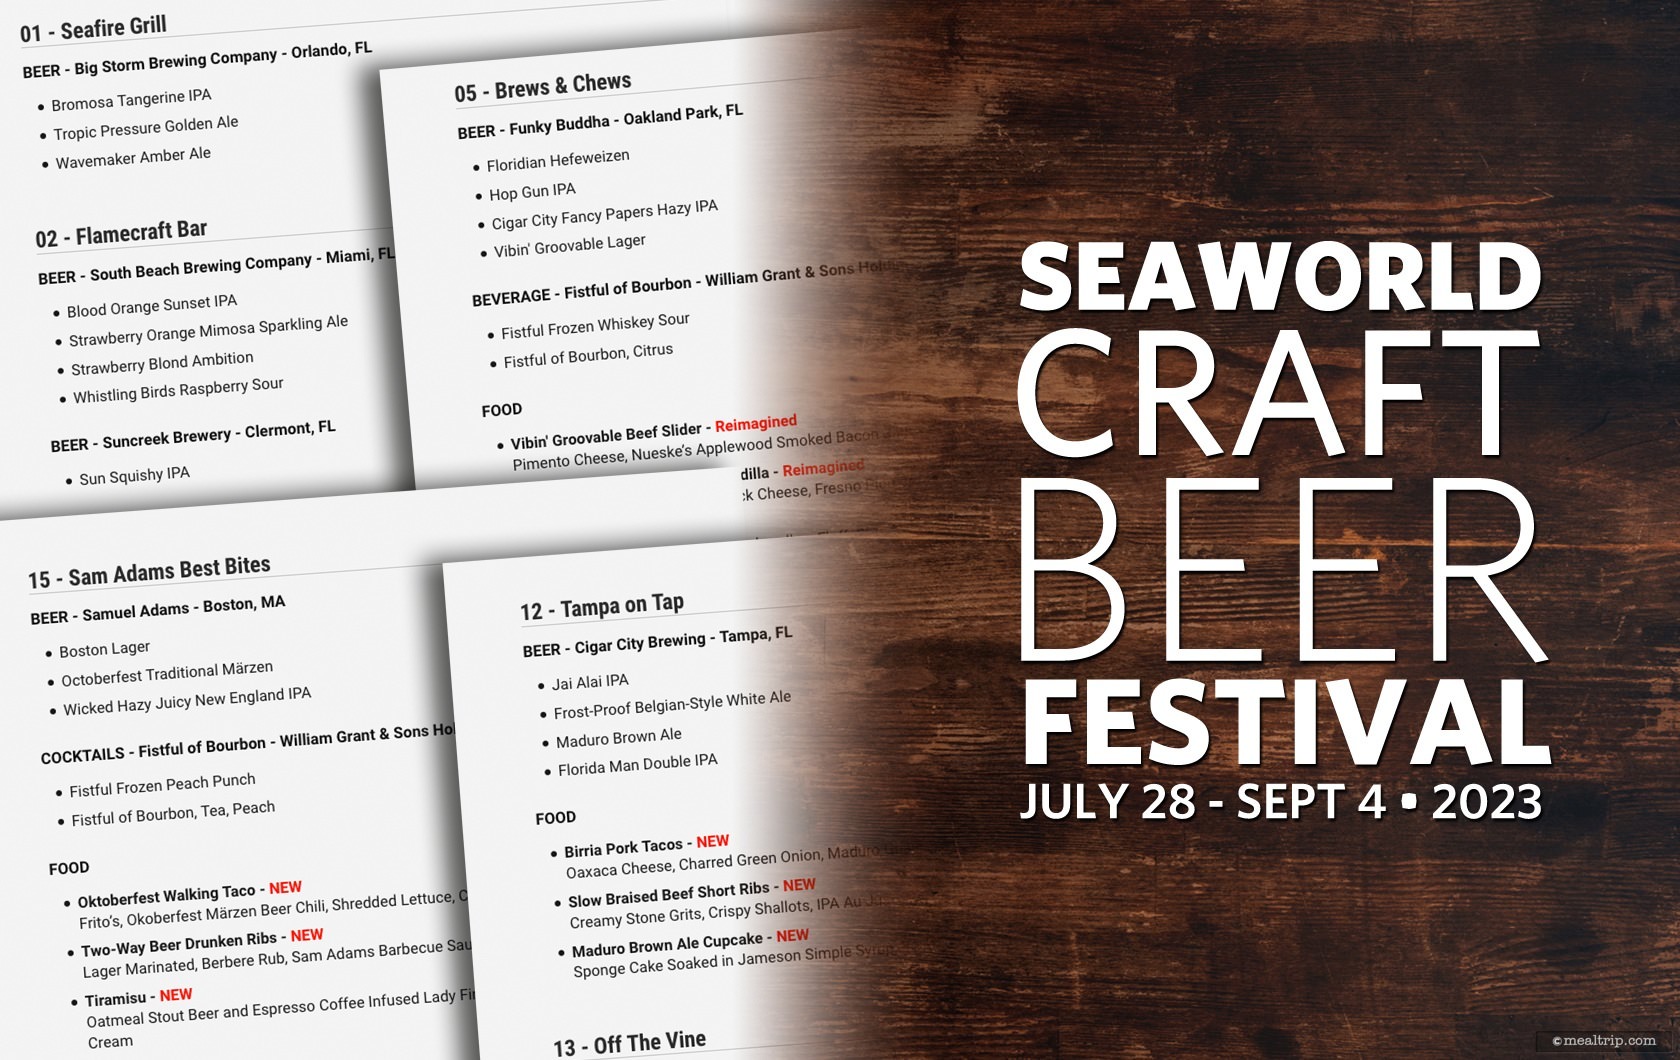 Menu Items for the 2023 Craft Beer Festival at SeaWorld, Orlando